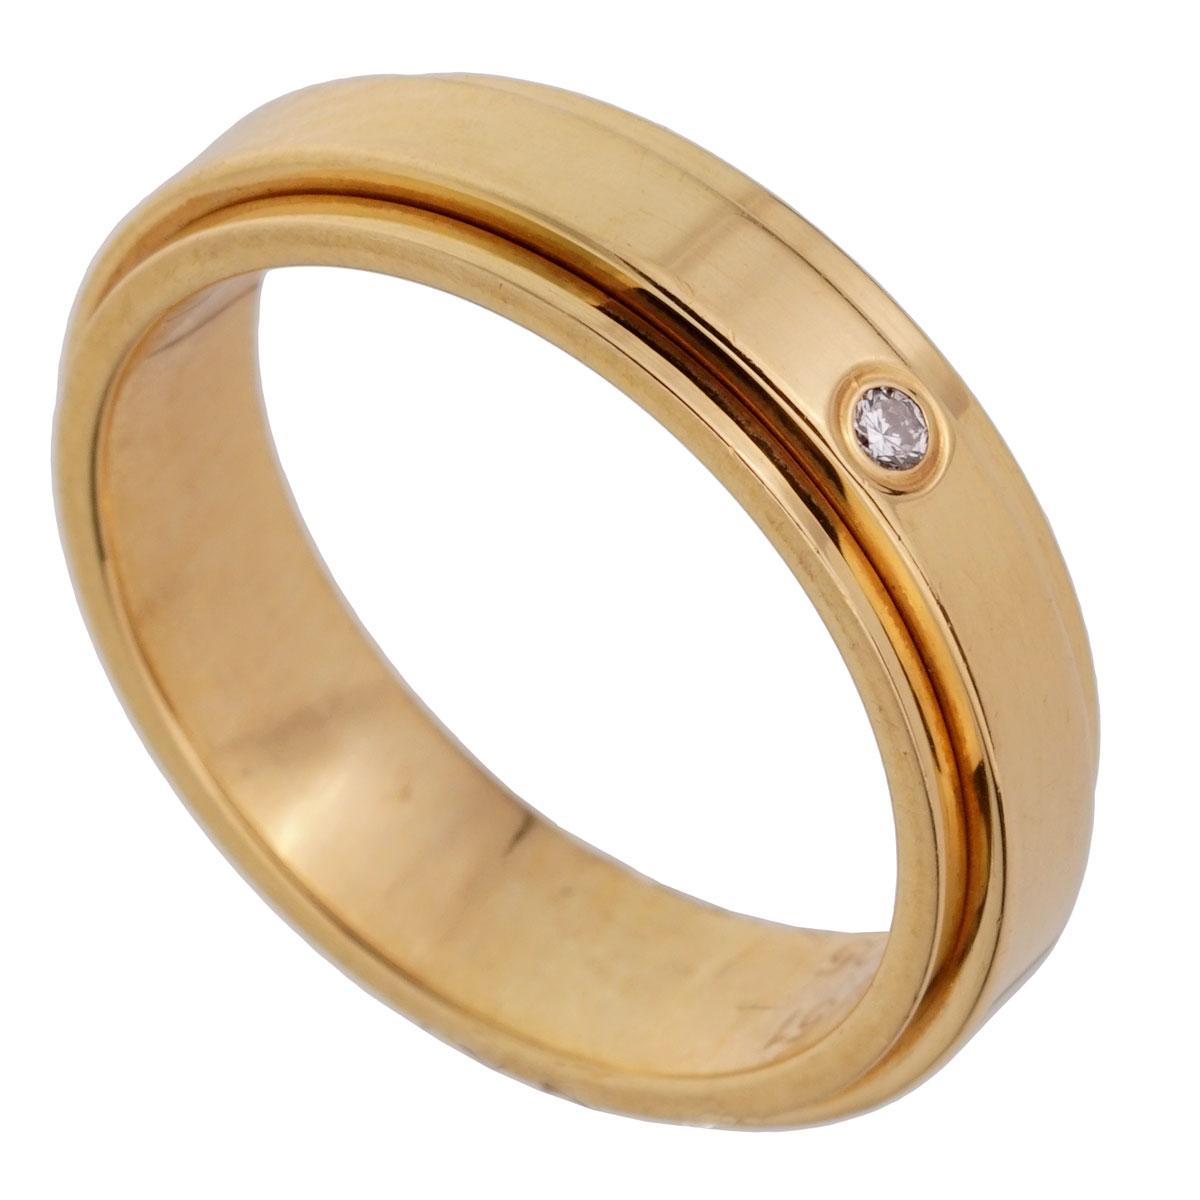 A chic Piaget Possession diamond ring featuring a spinning center band set with a .02 ct round brilliant cut diamond in 18k yellow gold. The ring measures a size 5 1/2

Sku: 1964